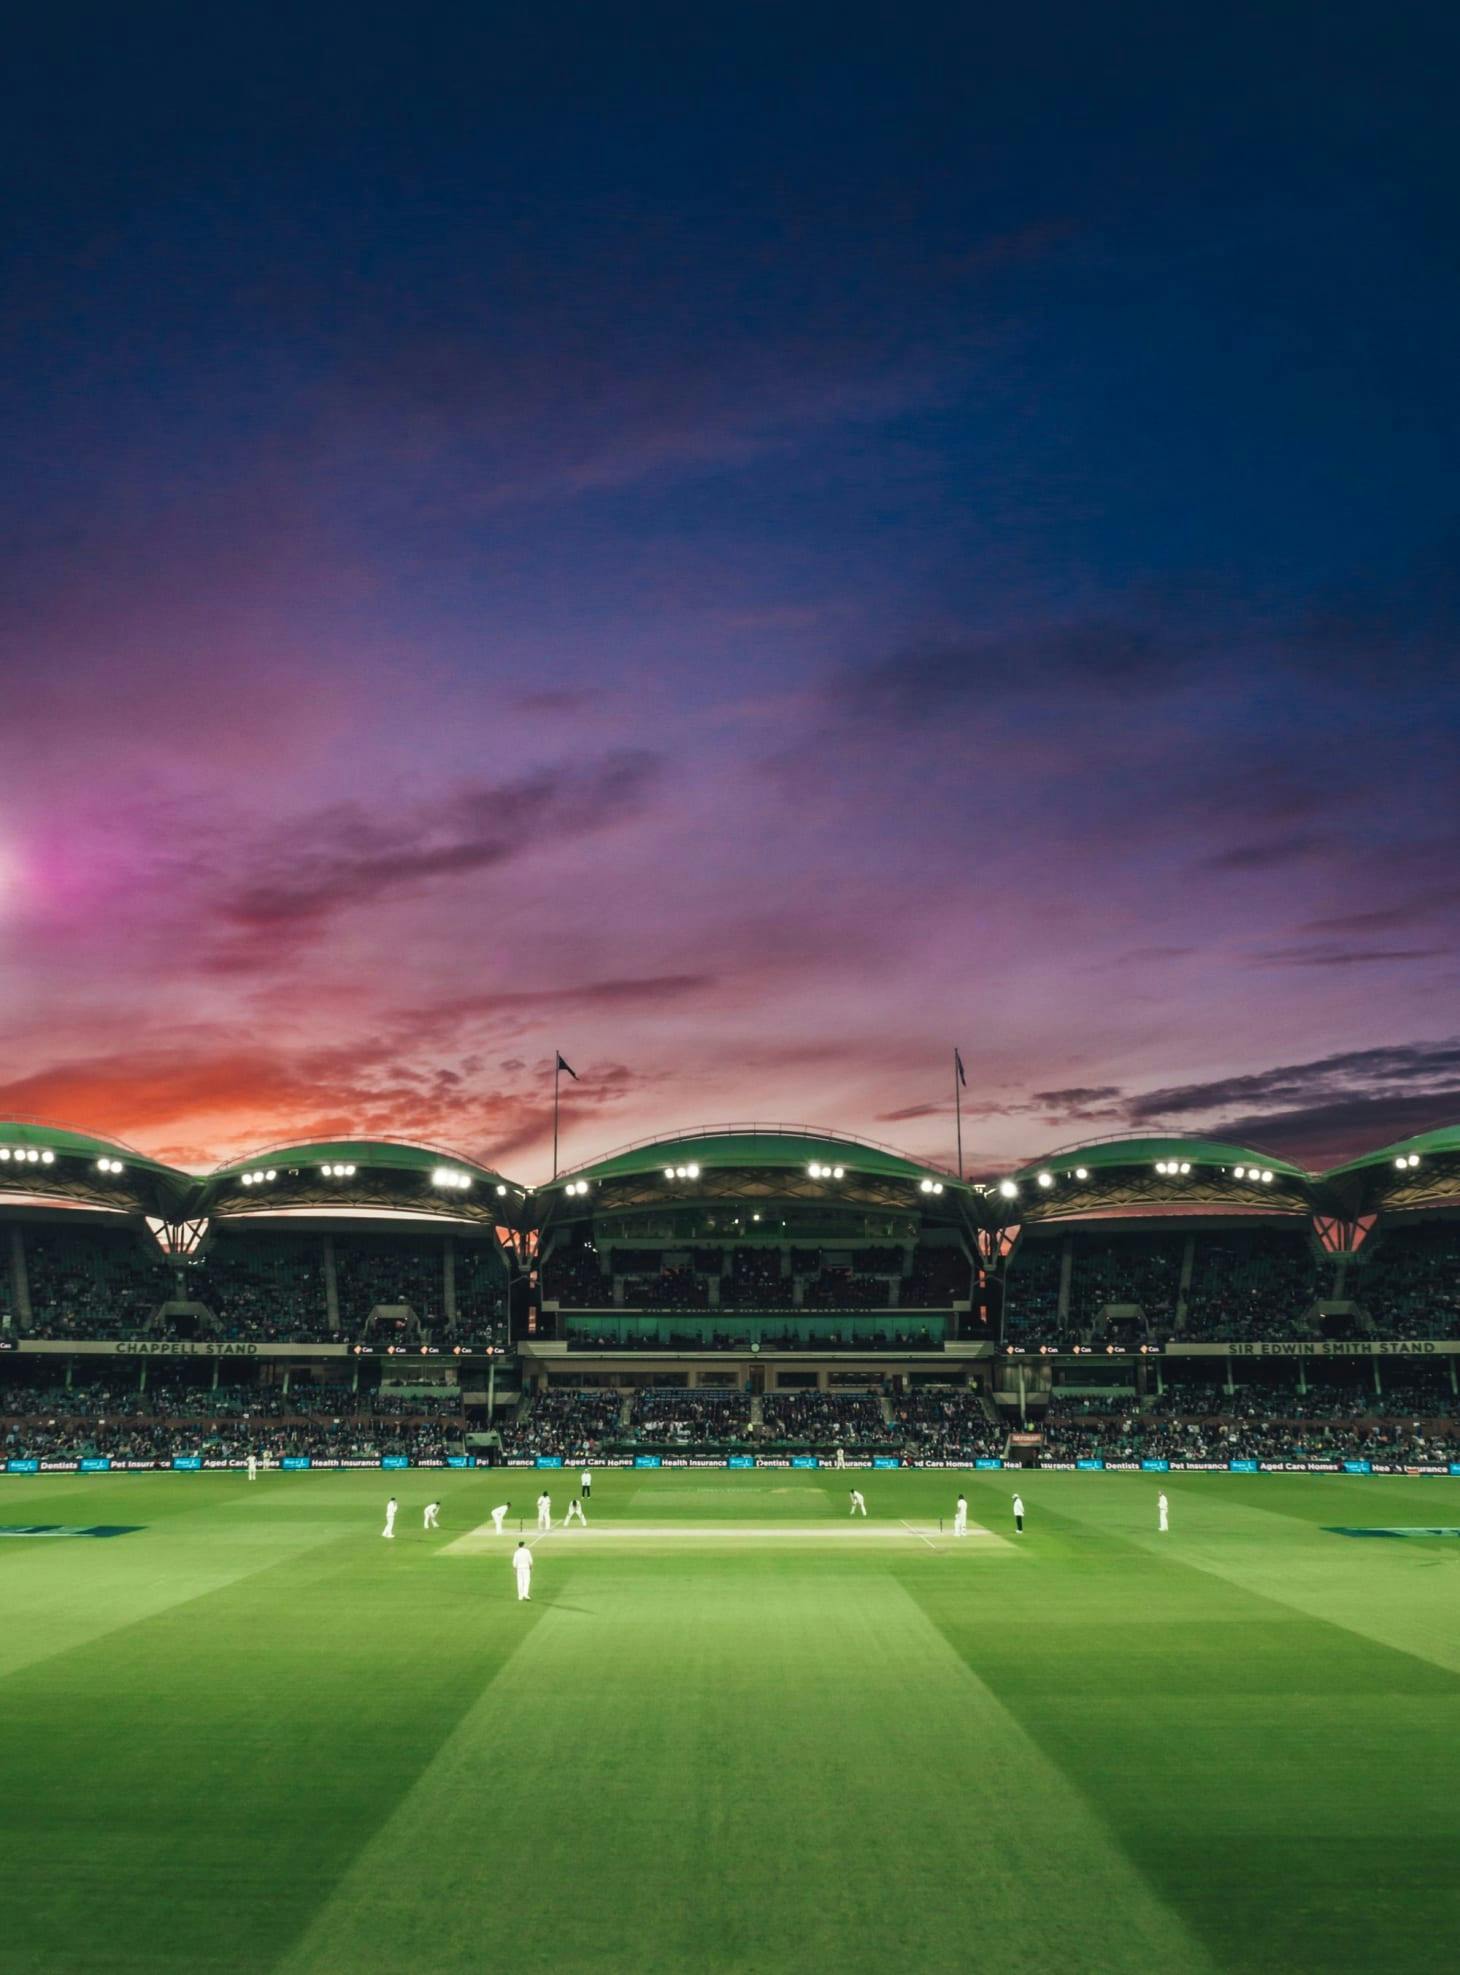 Where to watch the Big Bash League 2020/21 live on TV & stream